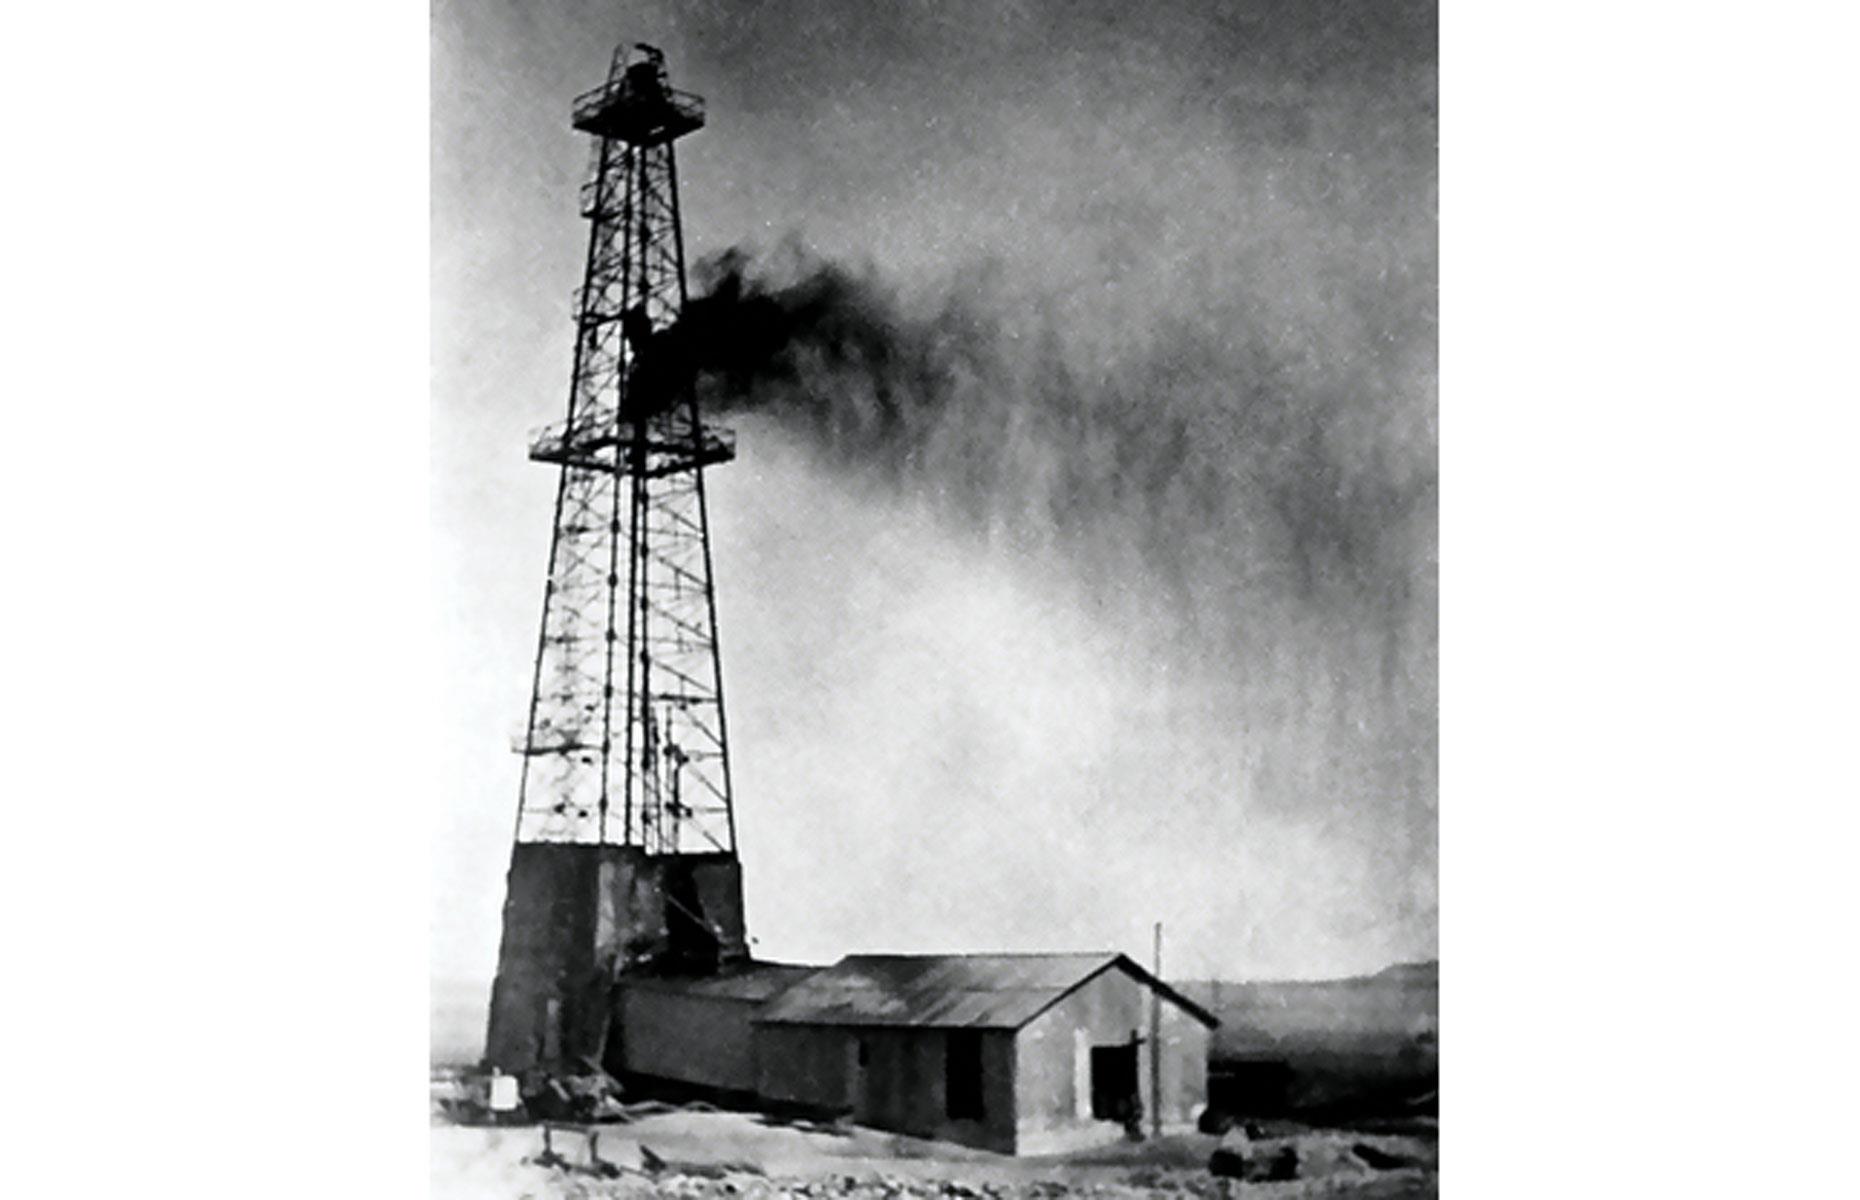 <p>All that changed in the late 1930s. The discovery of colossal oil reserves in 1938 was an epic reversal of fortune for the needy country. By the late 1940s, Saudi oil wells were pumping out barrel upon barrel of the commodity, but the country really cashed in from the 1970s onwards.</p>  <p>The 1973 oil crisis pushed up prices and massively enriched the Saudi economy. Prices dropped during the mid-1980s and were low until the late 1990s. During this time, Saudi Arabia racked up substantial foreign debts, but its citizens maintained a high standard of living.</p>